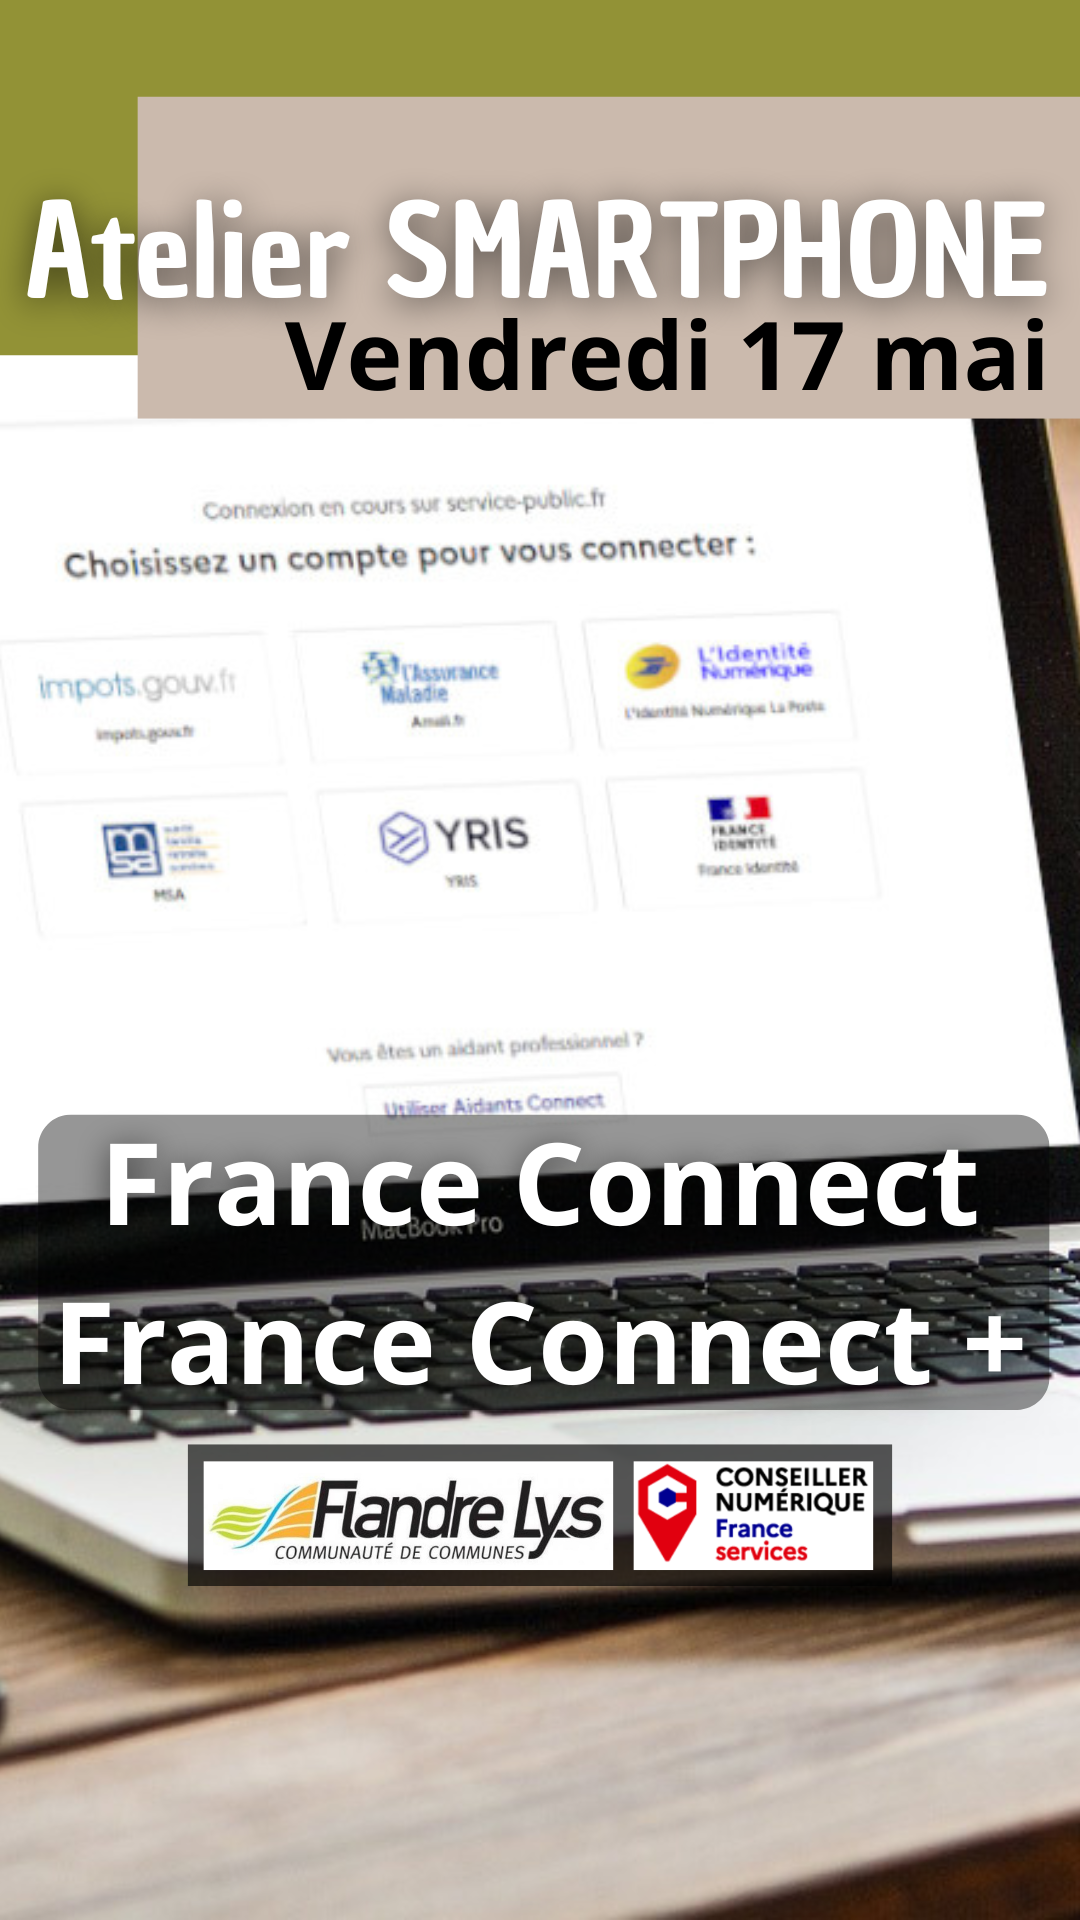 Atelier SMARTPHONE "France Connect / France Connect +"